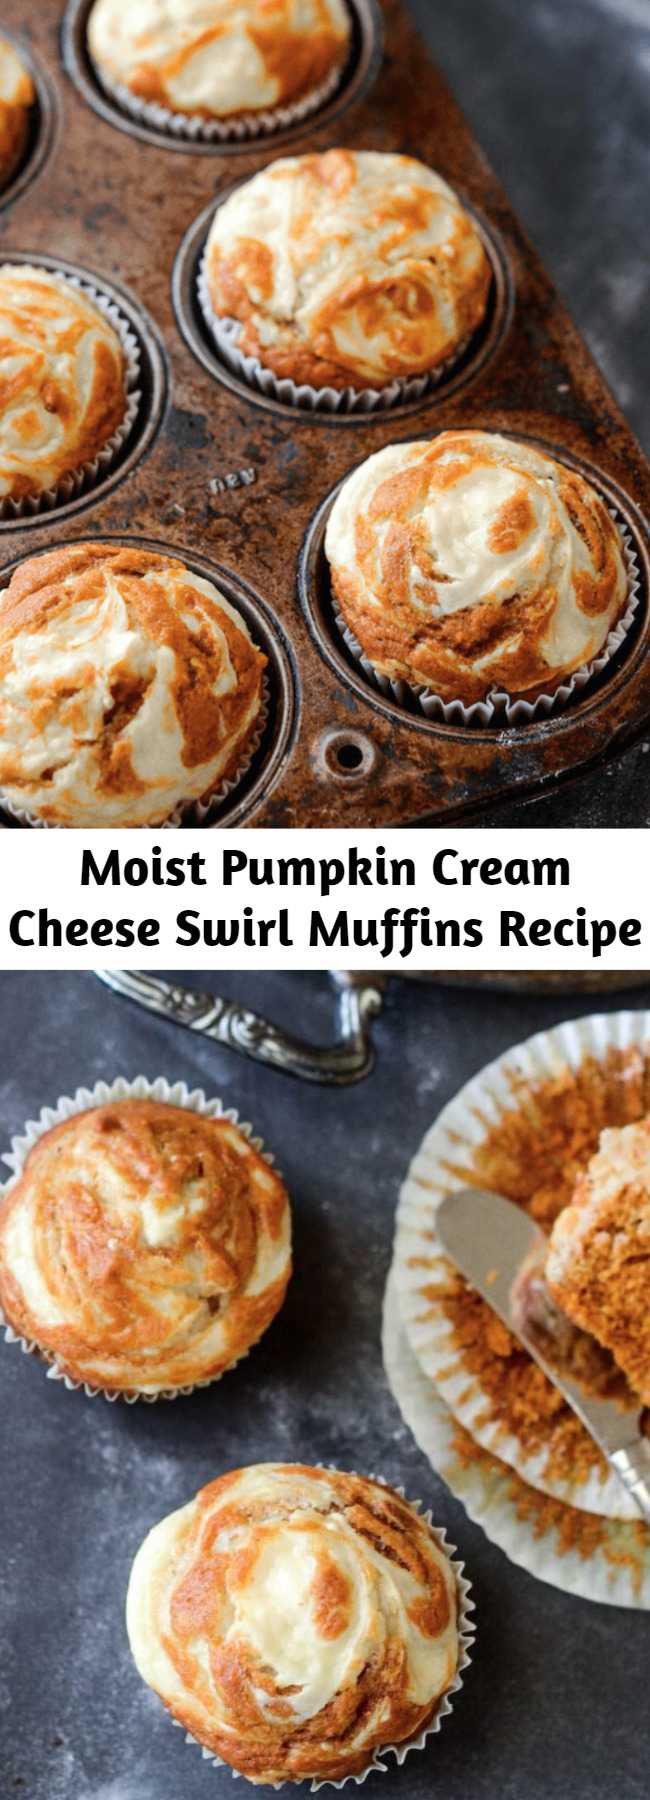 Moist Pumpkin Cream Cheese Swirl Muffins Recipe - Moist spiced pumpkin muffins are topped with sweet cream cheese that melts into them as they bake and only take 30 minutes!